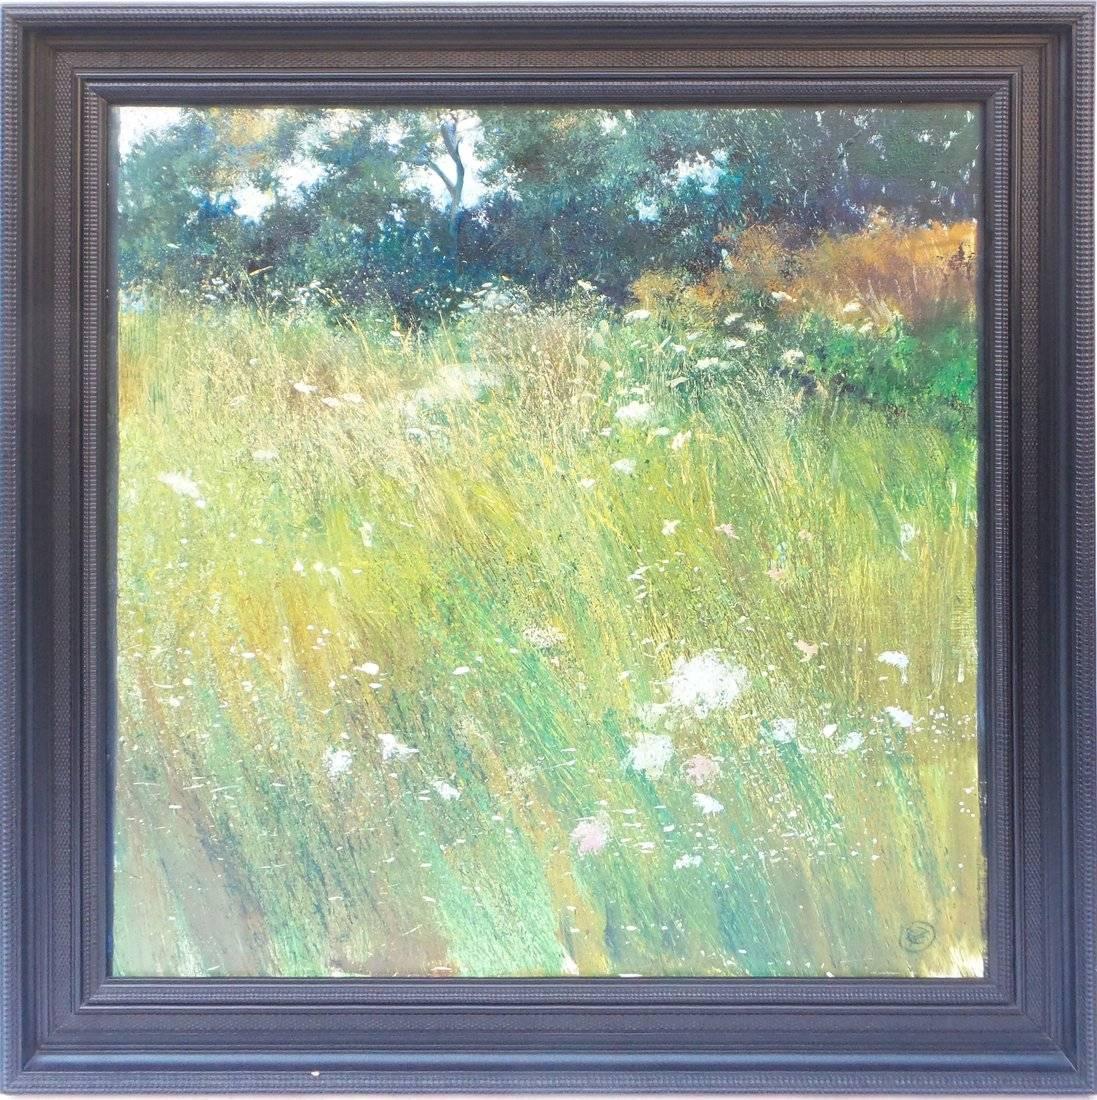 Hierba,  20th century Wild grass and flowers in an Impressionist landscape - Painting by Joaquin Torrents Llado